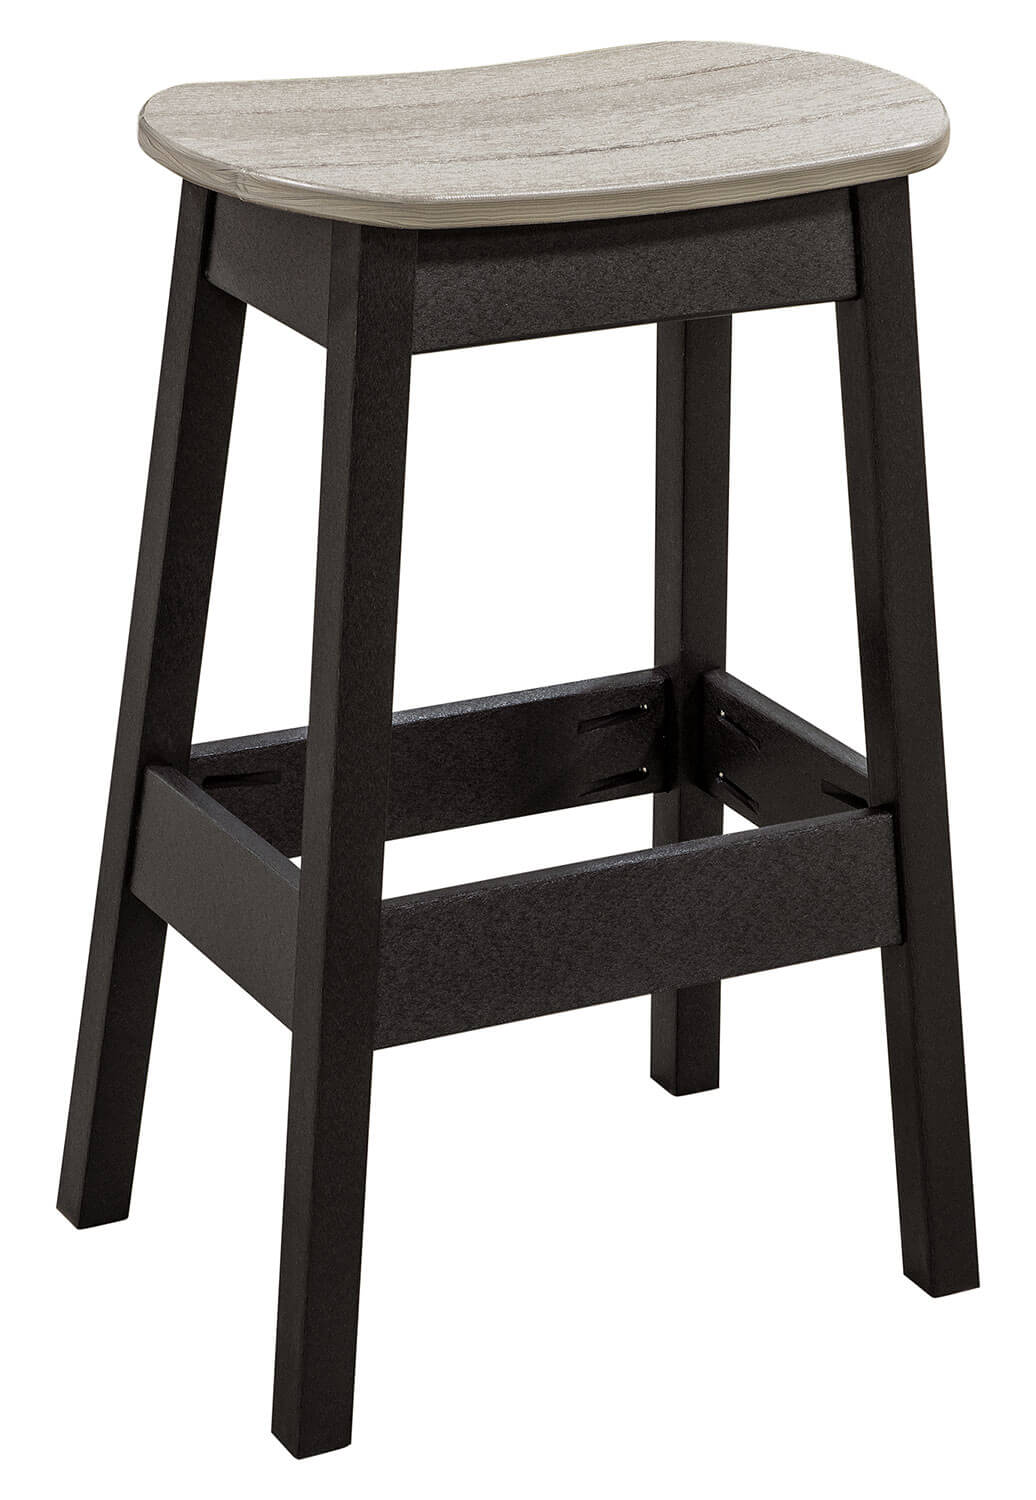 EC Woods Tacoma Outdoor Poly Barstool Shown in Drift Wood Gray and Black